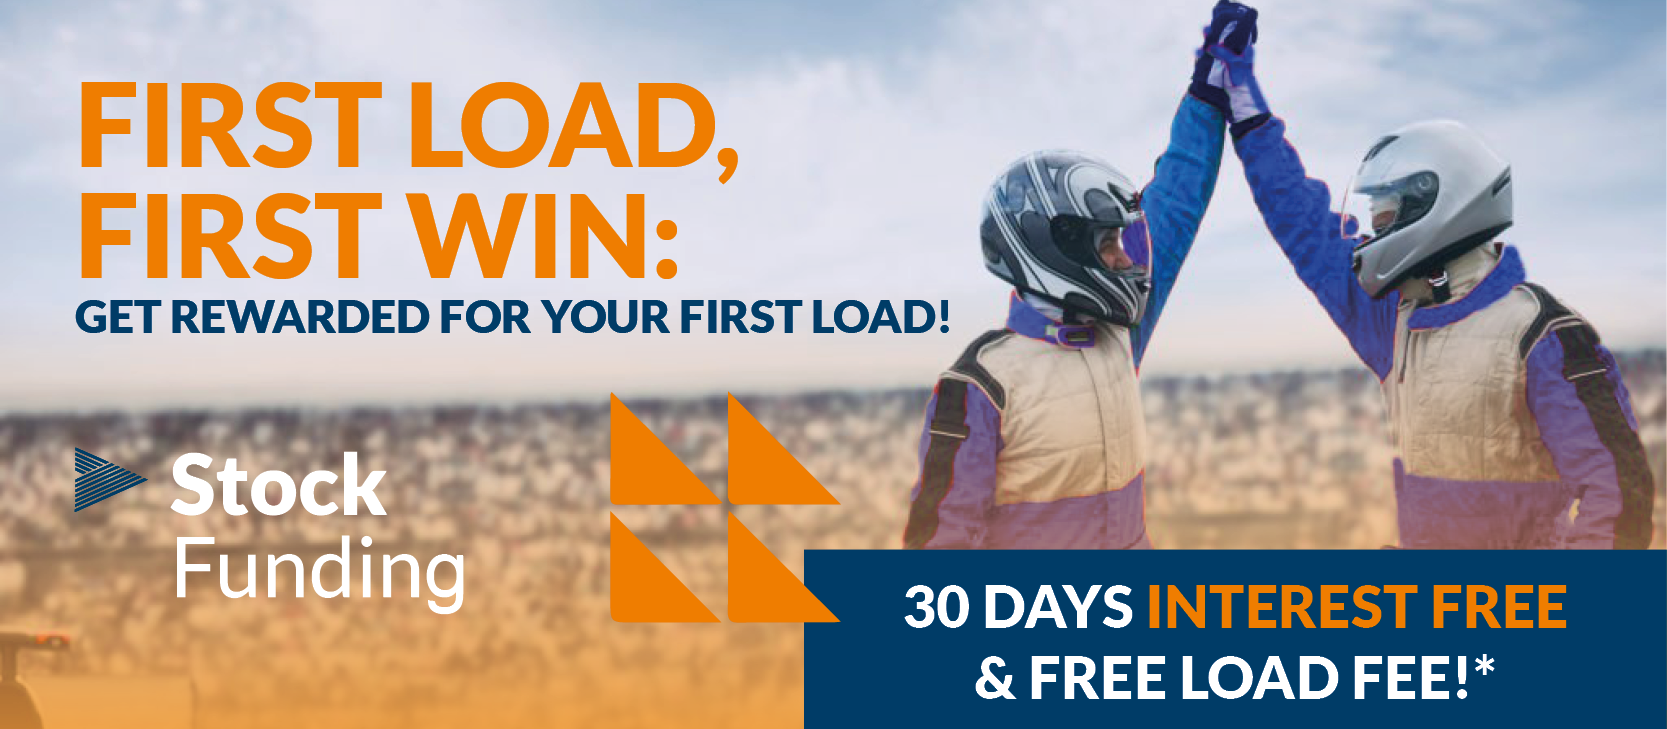 First Load, First Win: Get rewarded for your first load